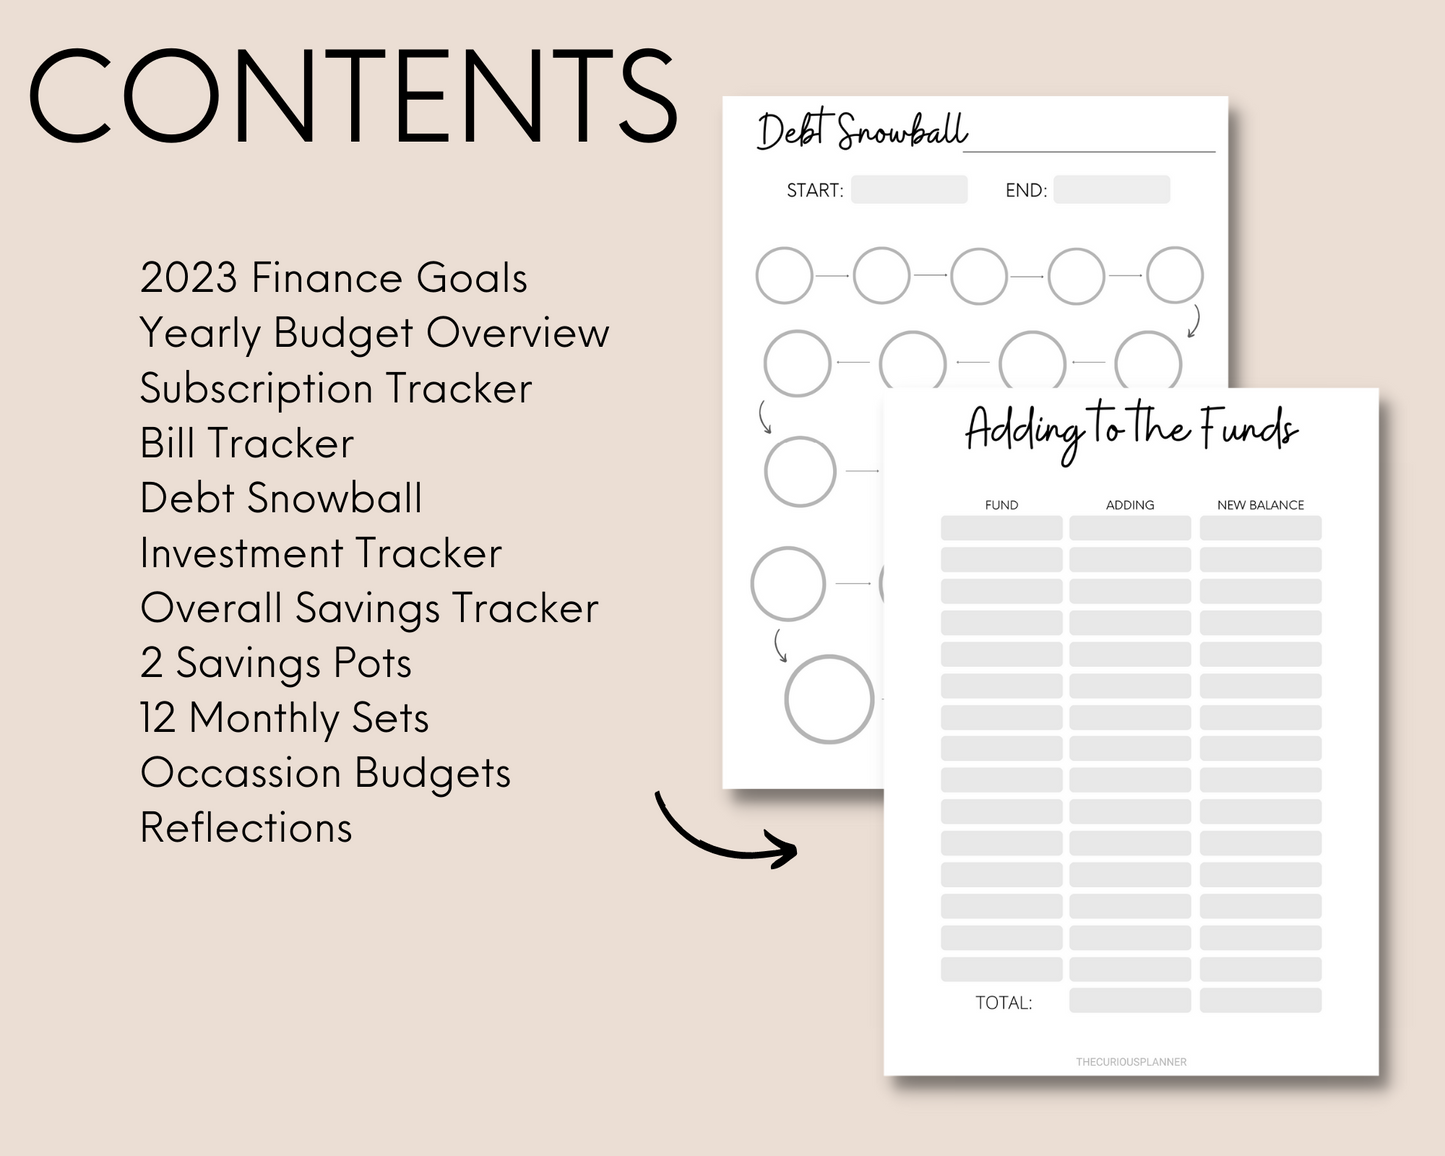 Undated Yearly Finance Planner Printable PDF